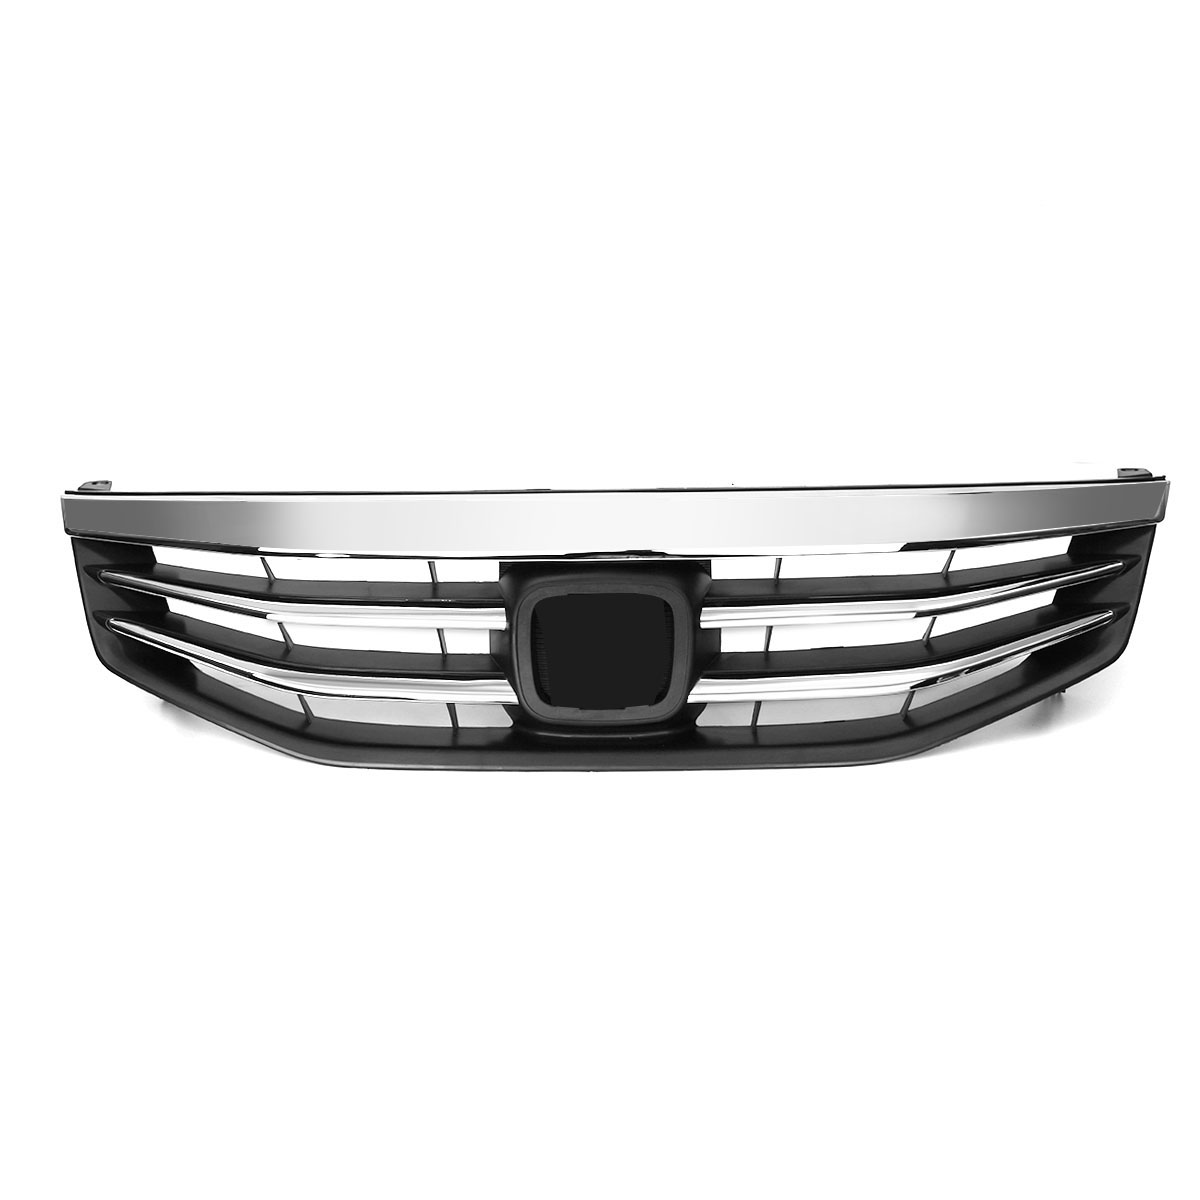 

ABS Car Vehicle Front Bumper Mesh Grill Grille For Honda Accord Sedan 2011 2012